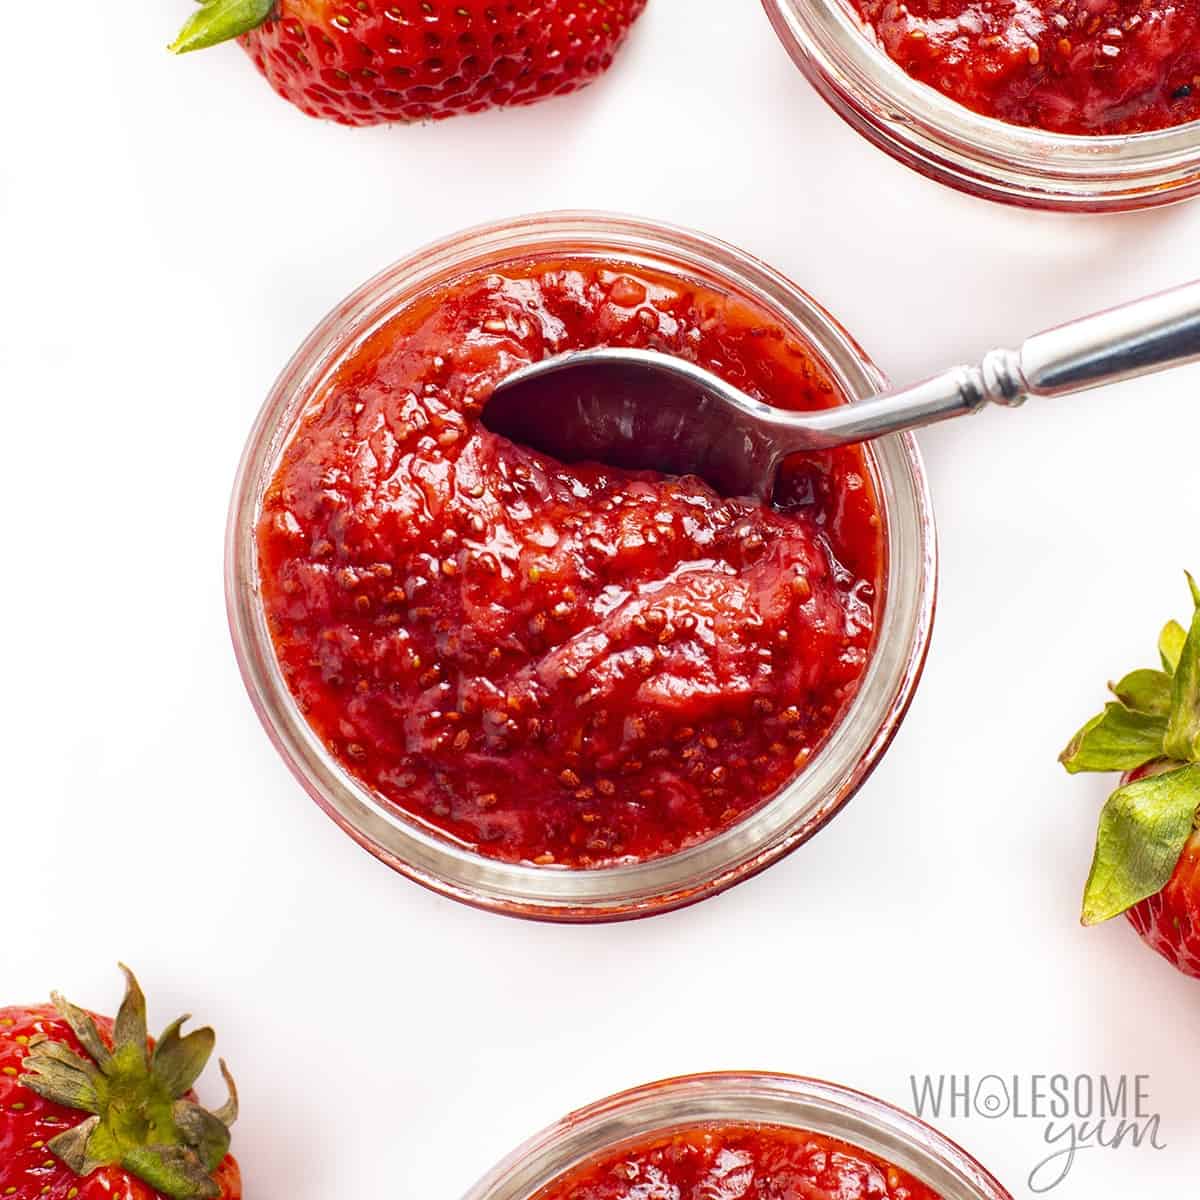 Over view of sugar free strawberry jam mad with chia seeds.